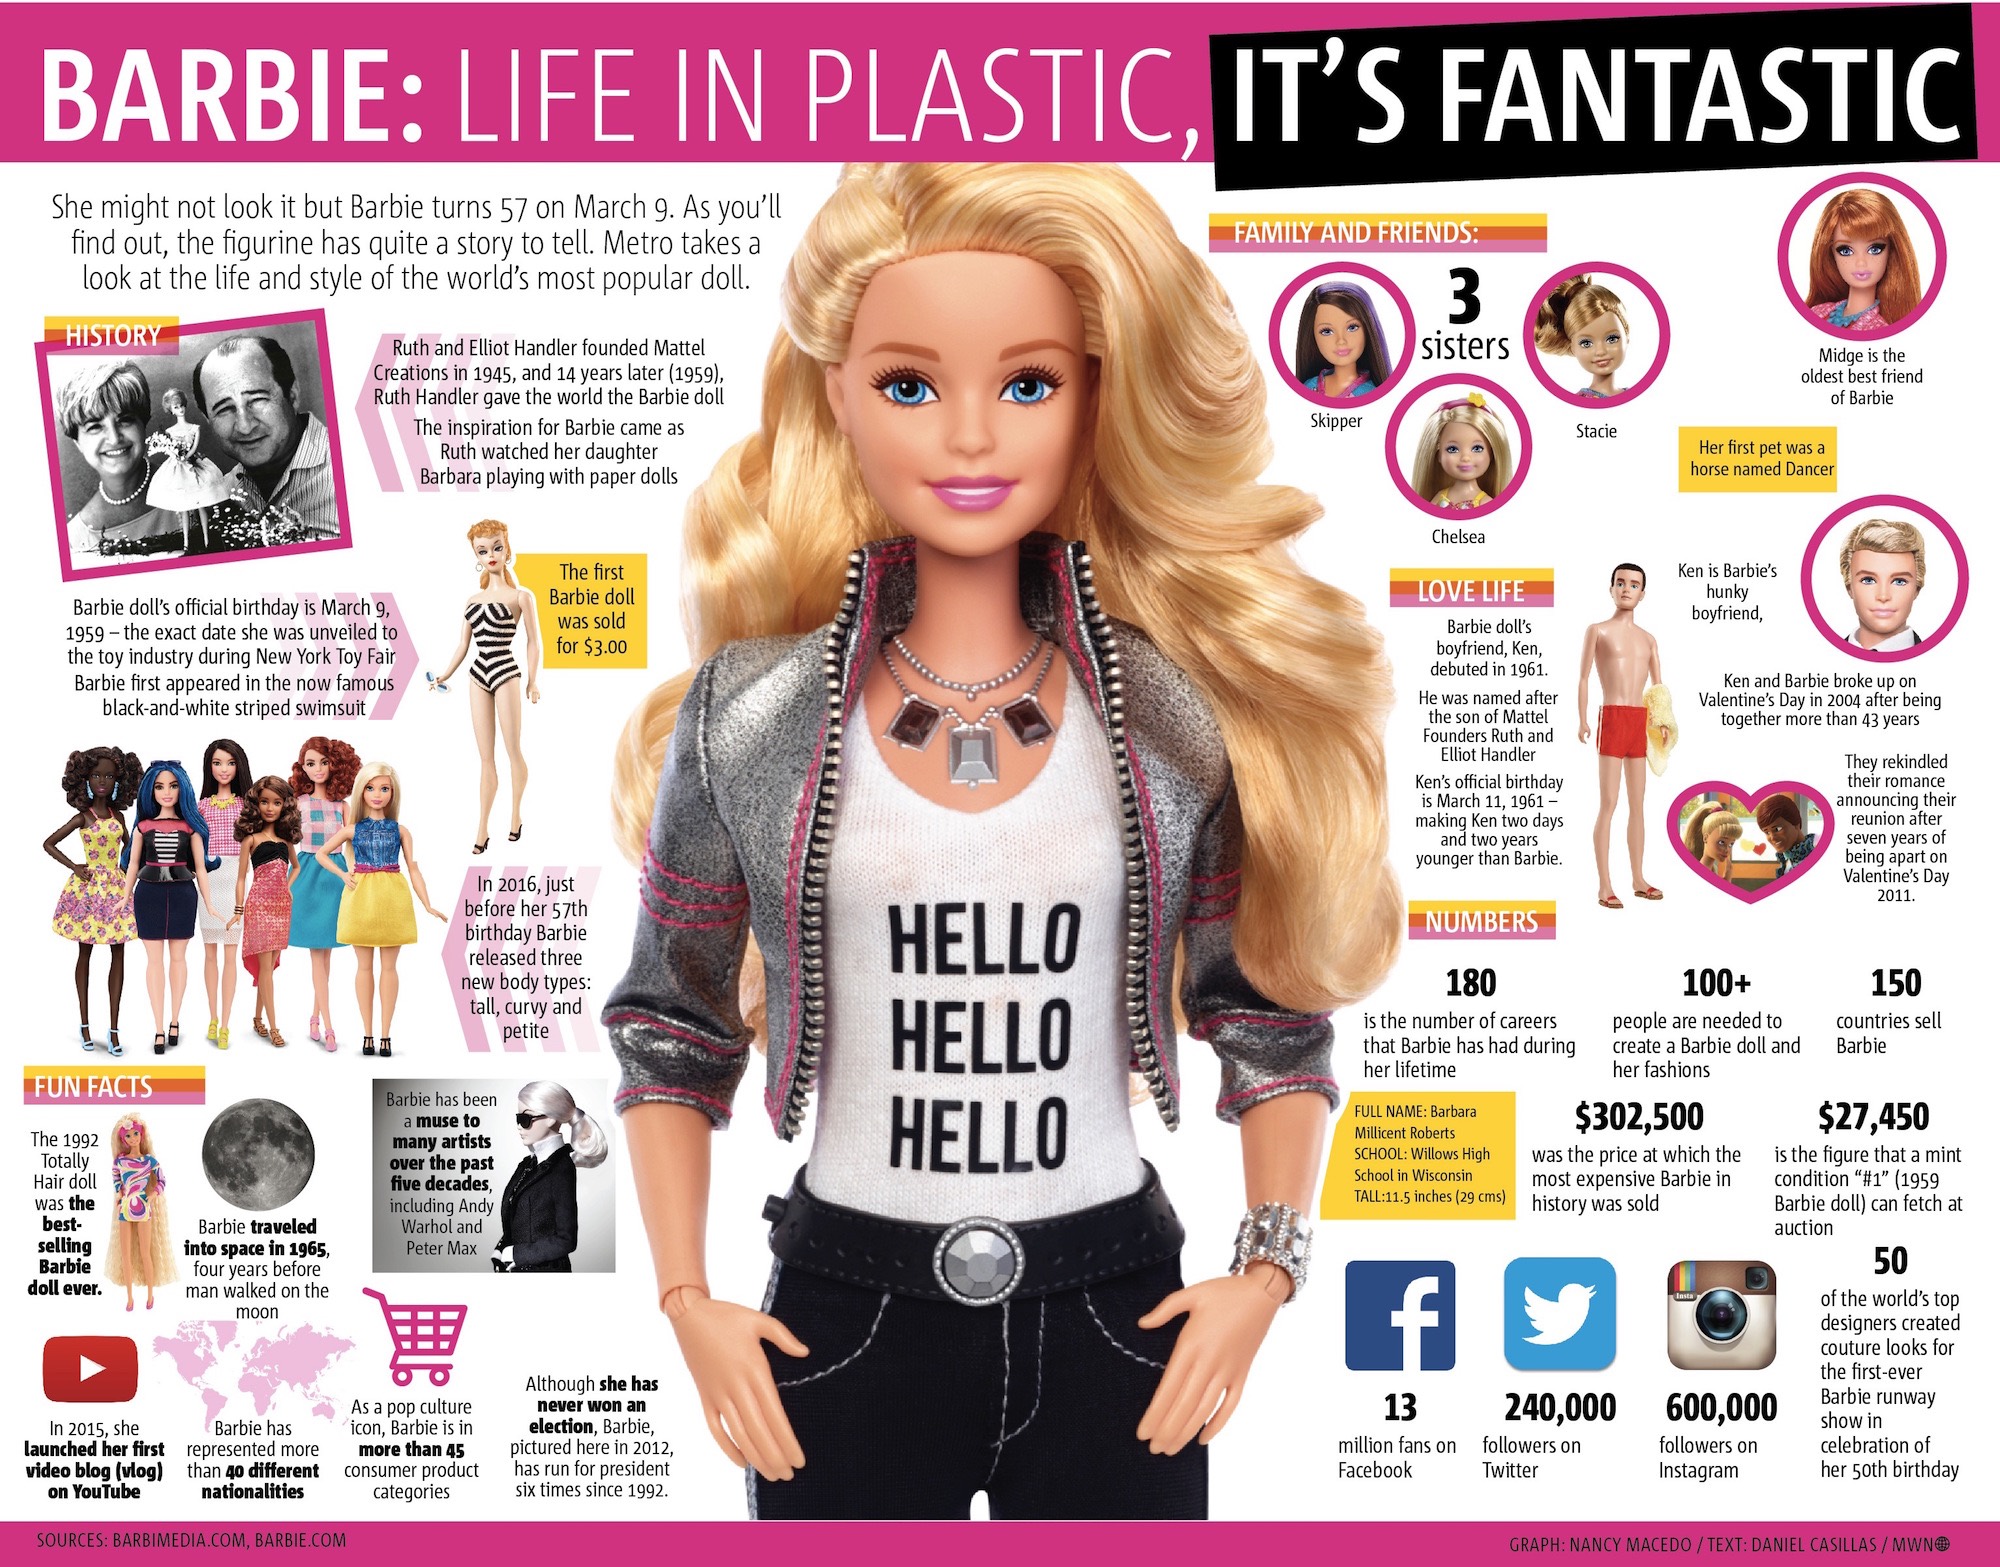 barbie-facts-figures-and-history-you-didn-t-know-for-her-57th-birthday-metro-us